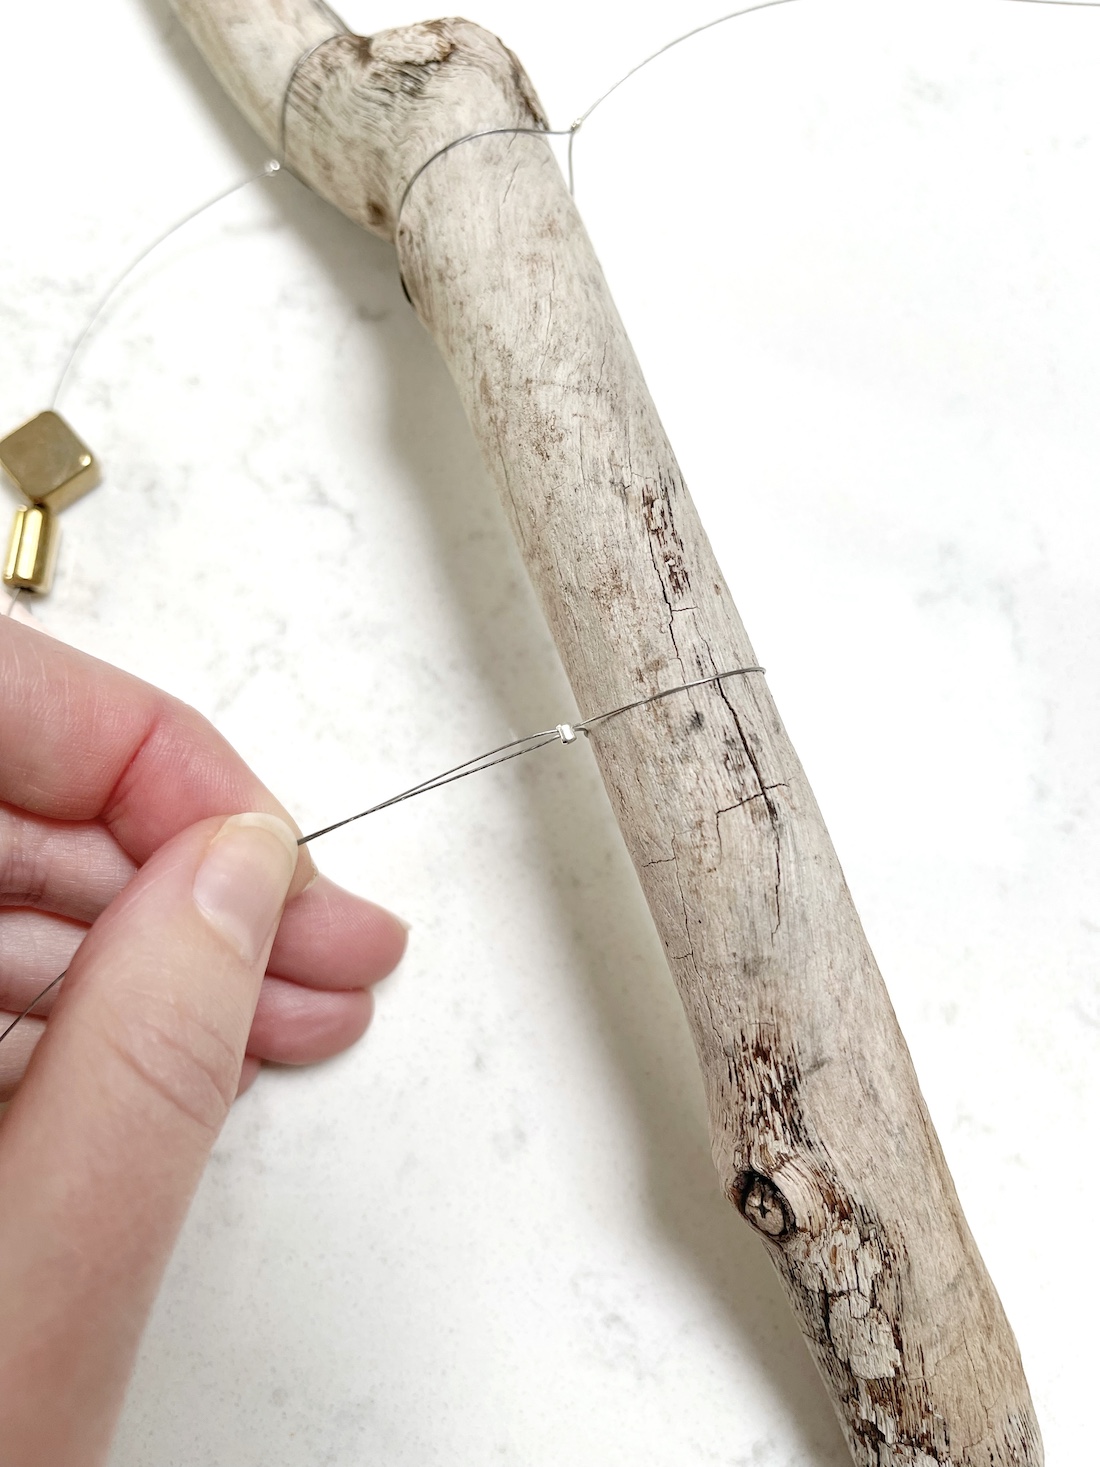 Use beading wire to hang the driftwood wall art